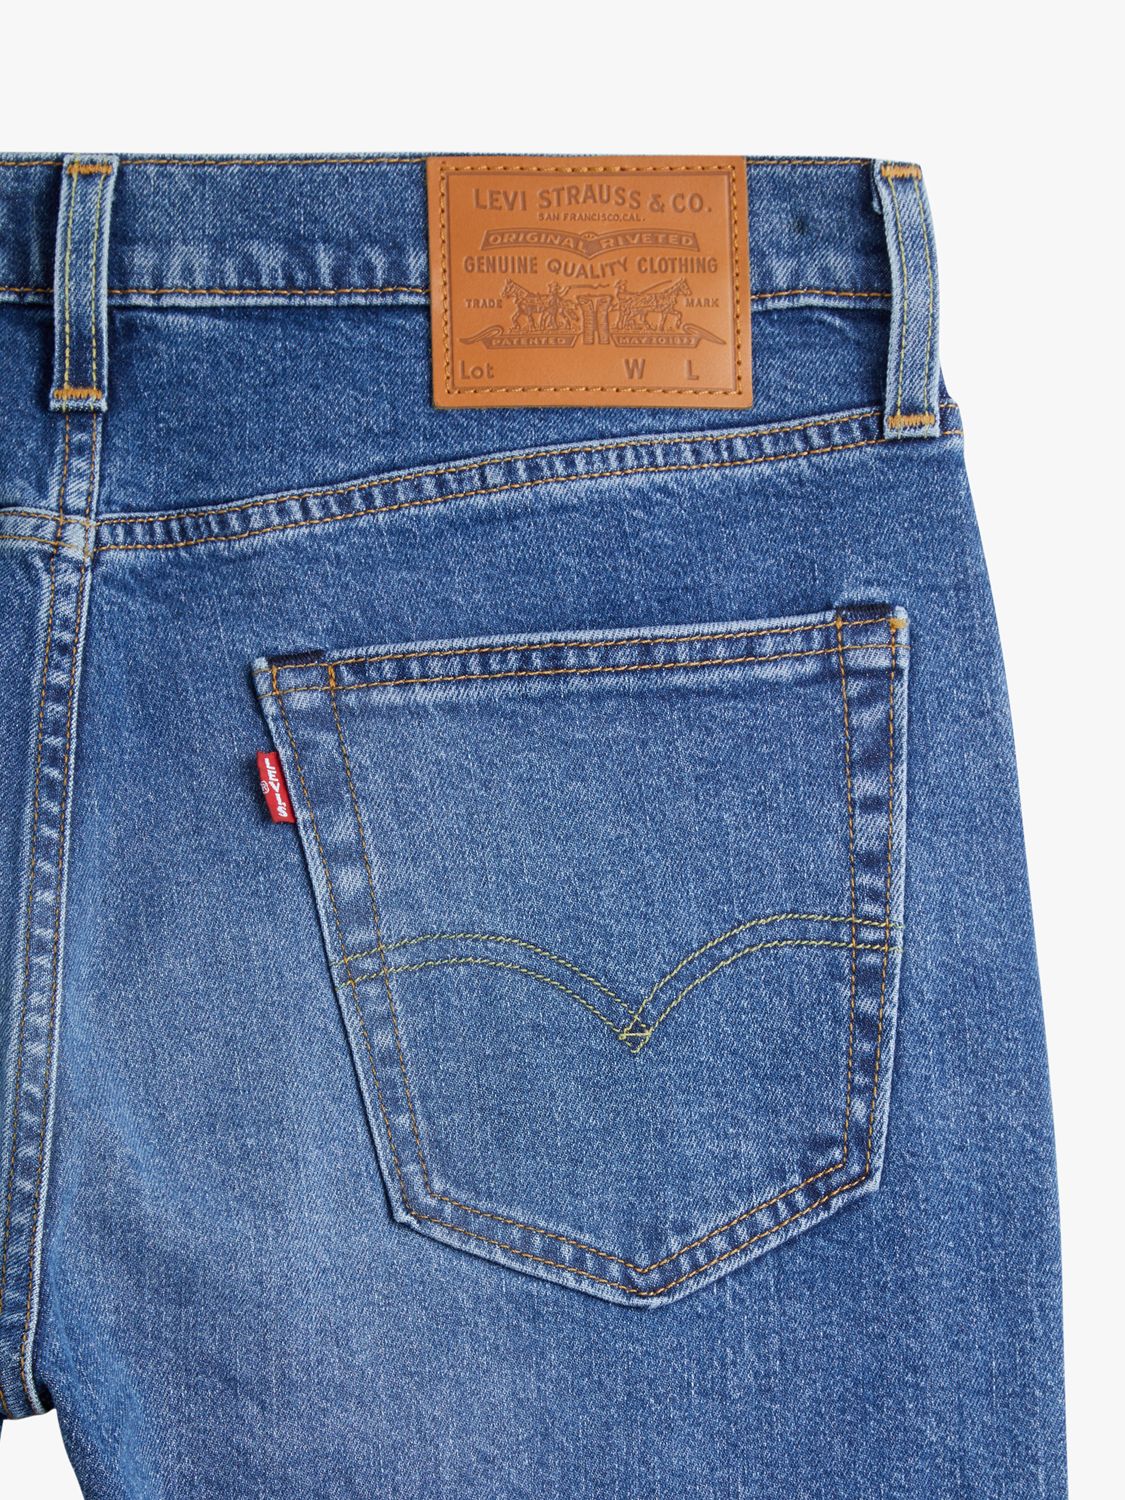 Levi's Slim Tapered Jeans, Corfu How Blue at John Lewis & Partners